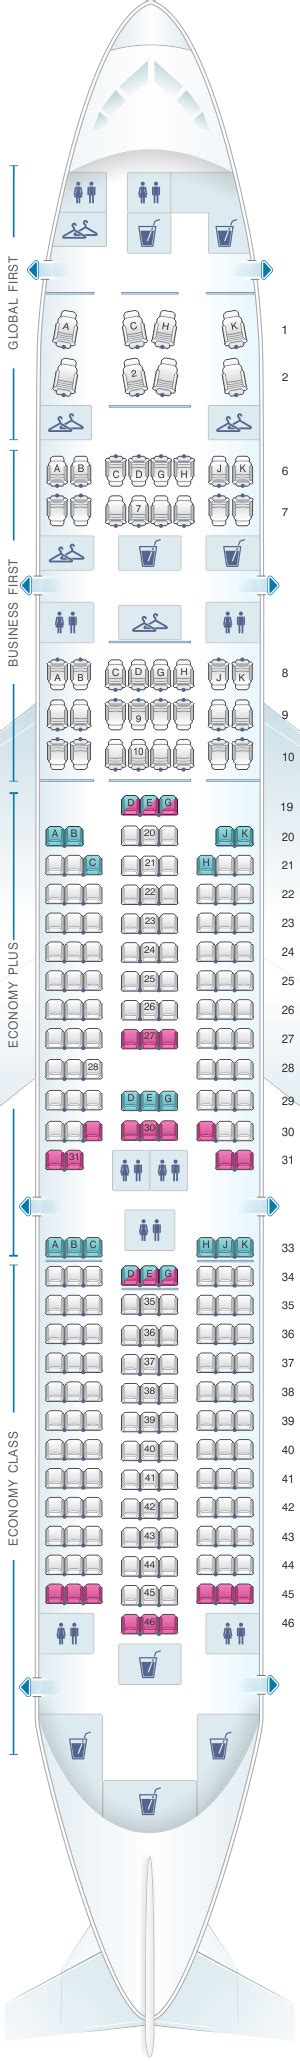 Detailed seat map United Airlines Boeing B777 200 (777) - version 3. Find the best airplanes seats, information on legroom, recline and in-flight entertainment using our detailed online seating charts.. 